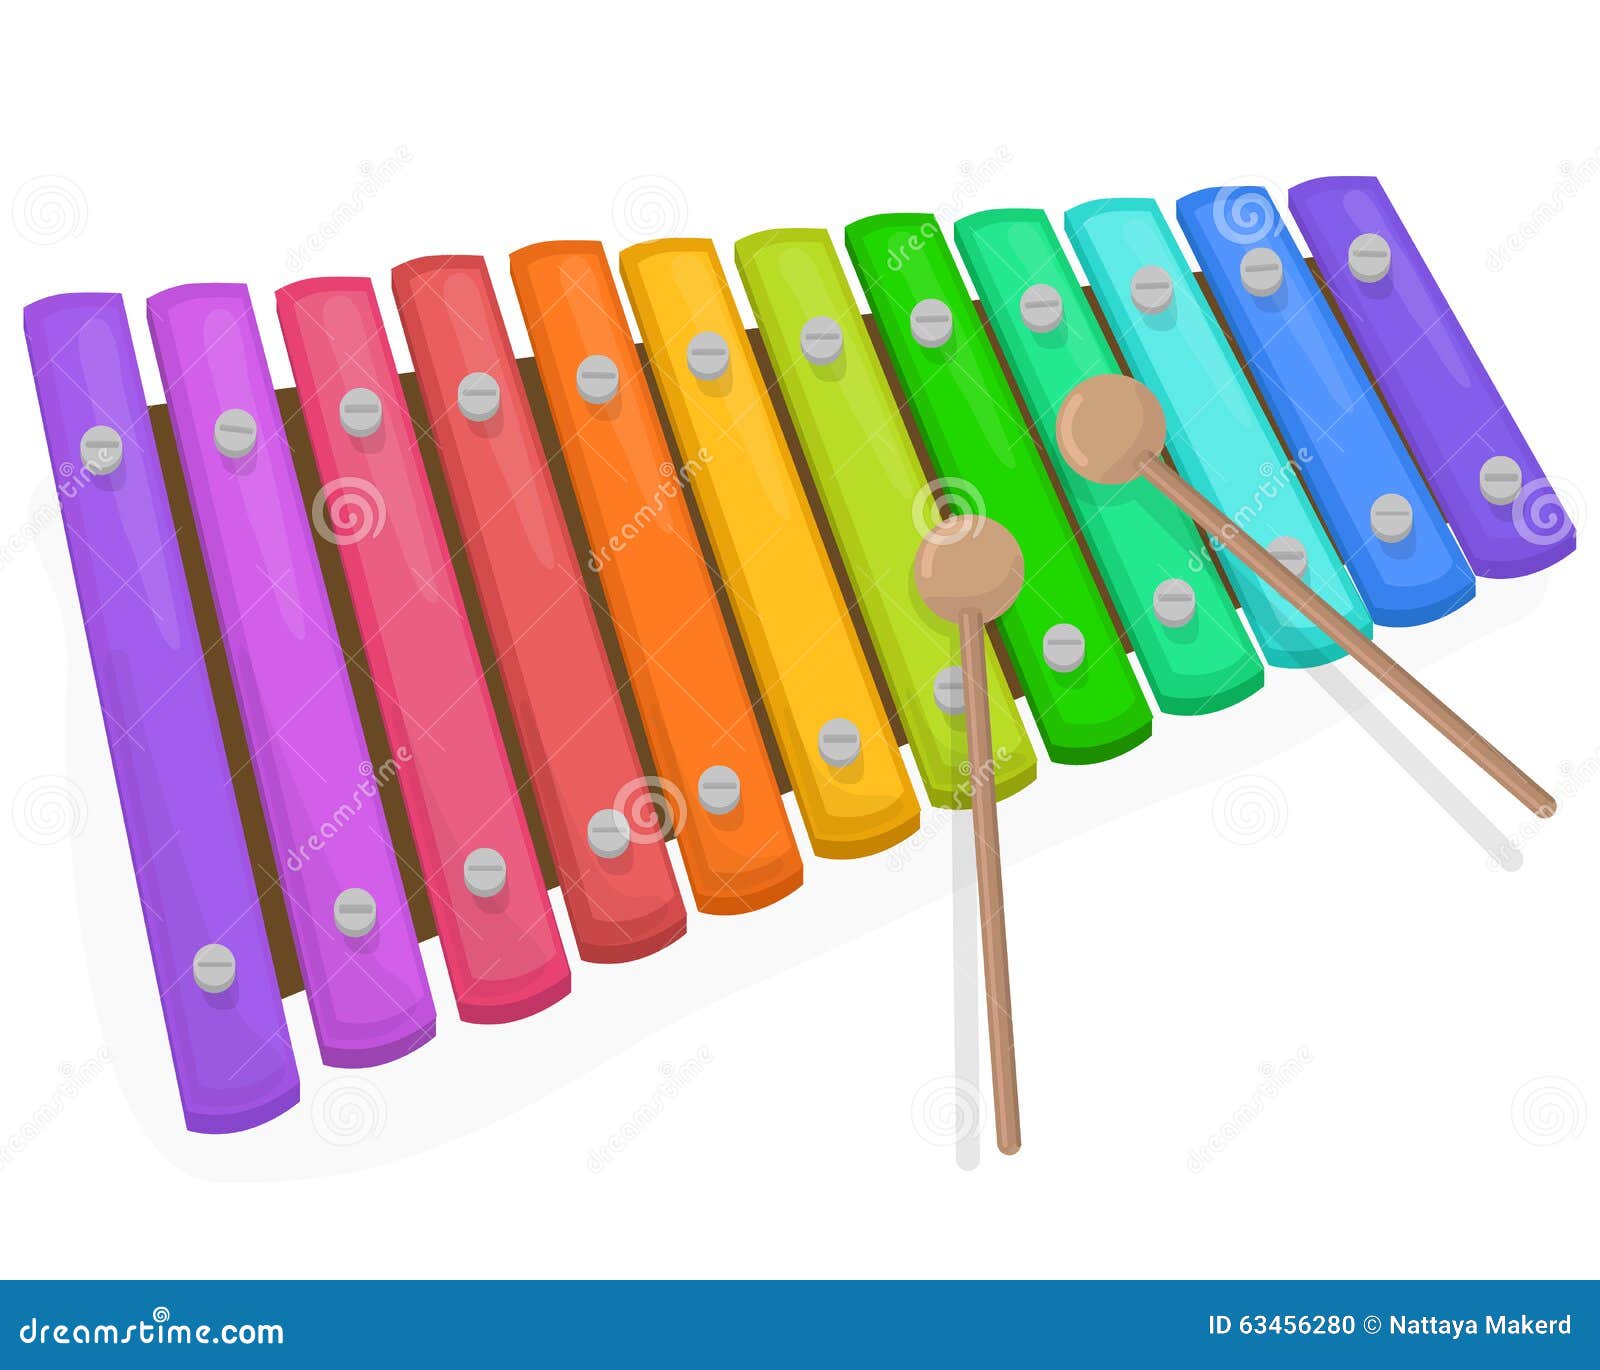 Colorful Xylophone With Mallets On A White Background Stock Vector